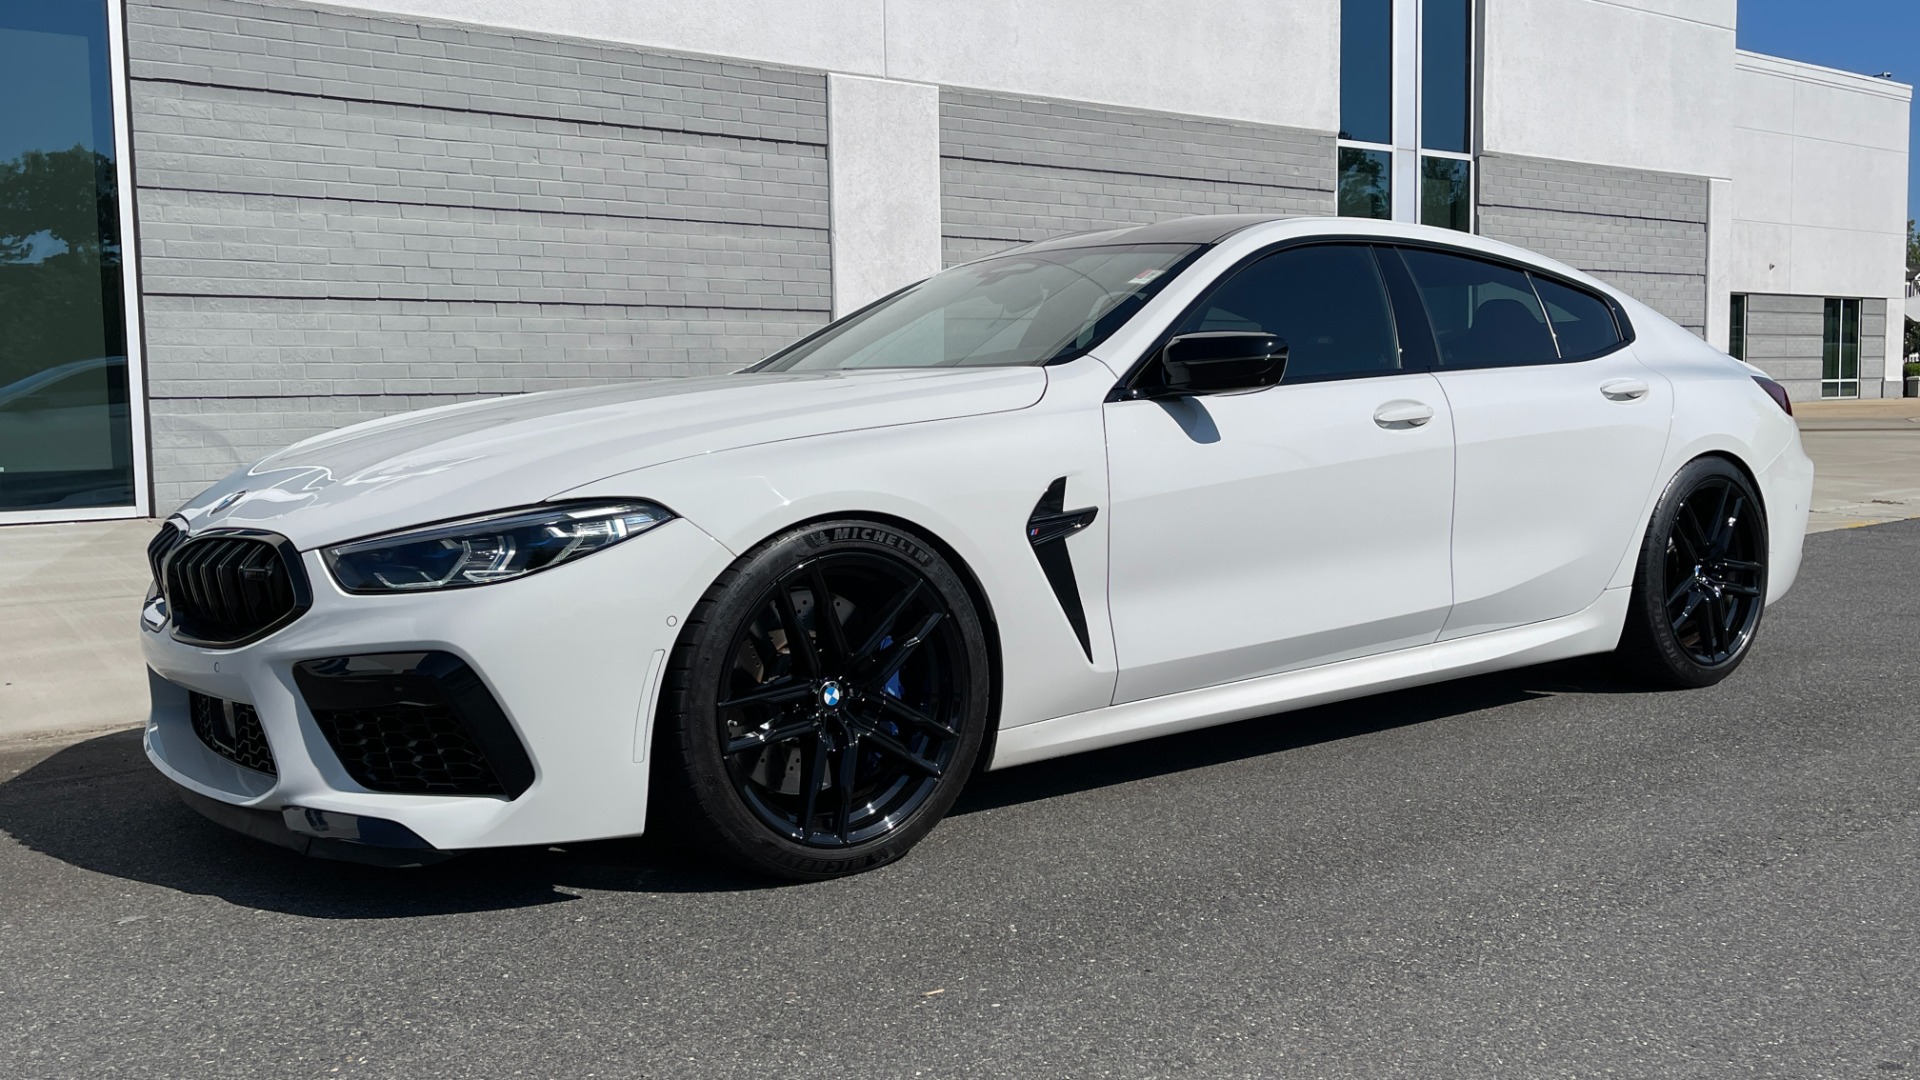 Used 2020 BMW M8 COMPETITON / TWIN TURBO / KW V3 SUSPENSION / FRONT LIFT / PPF / CERAMIC COA for sale Sold at Formula Imports in Charlotte NC 28227 3